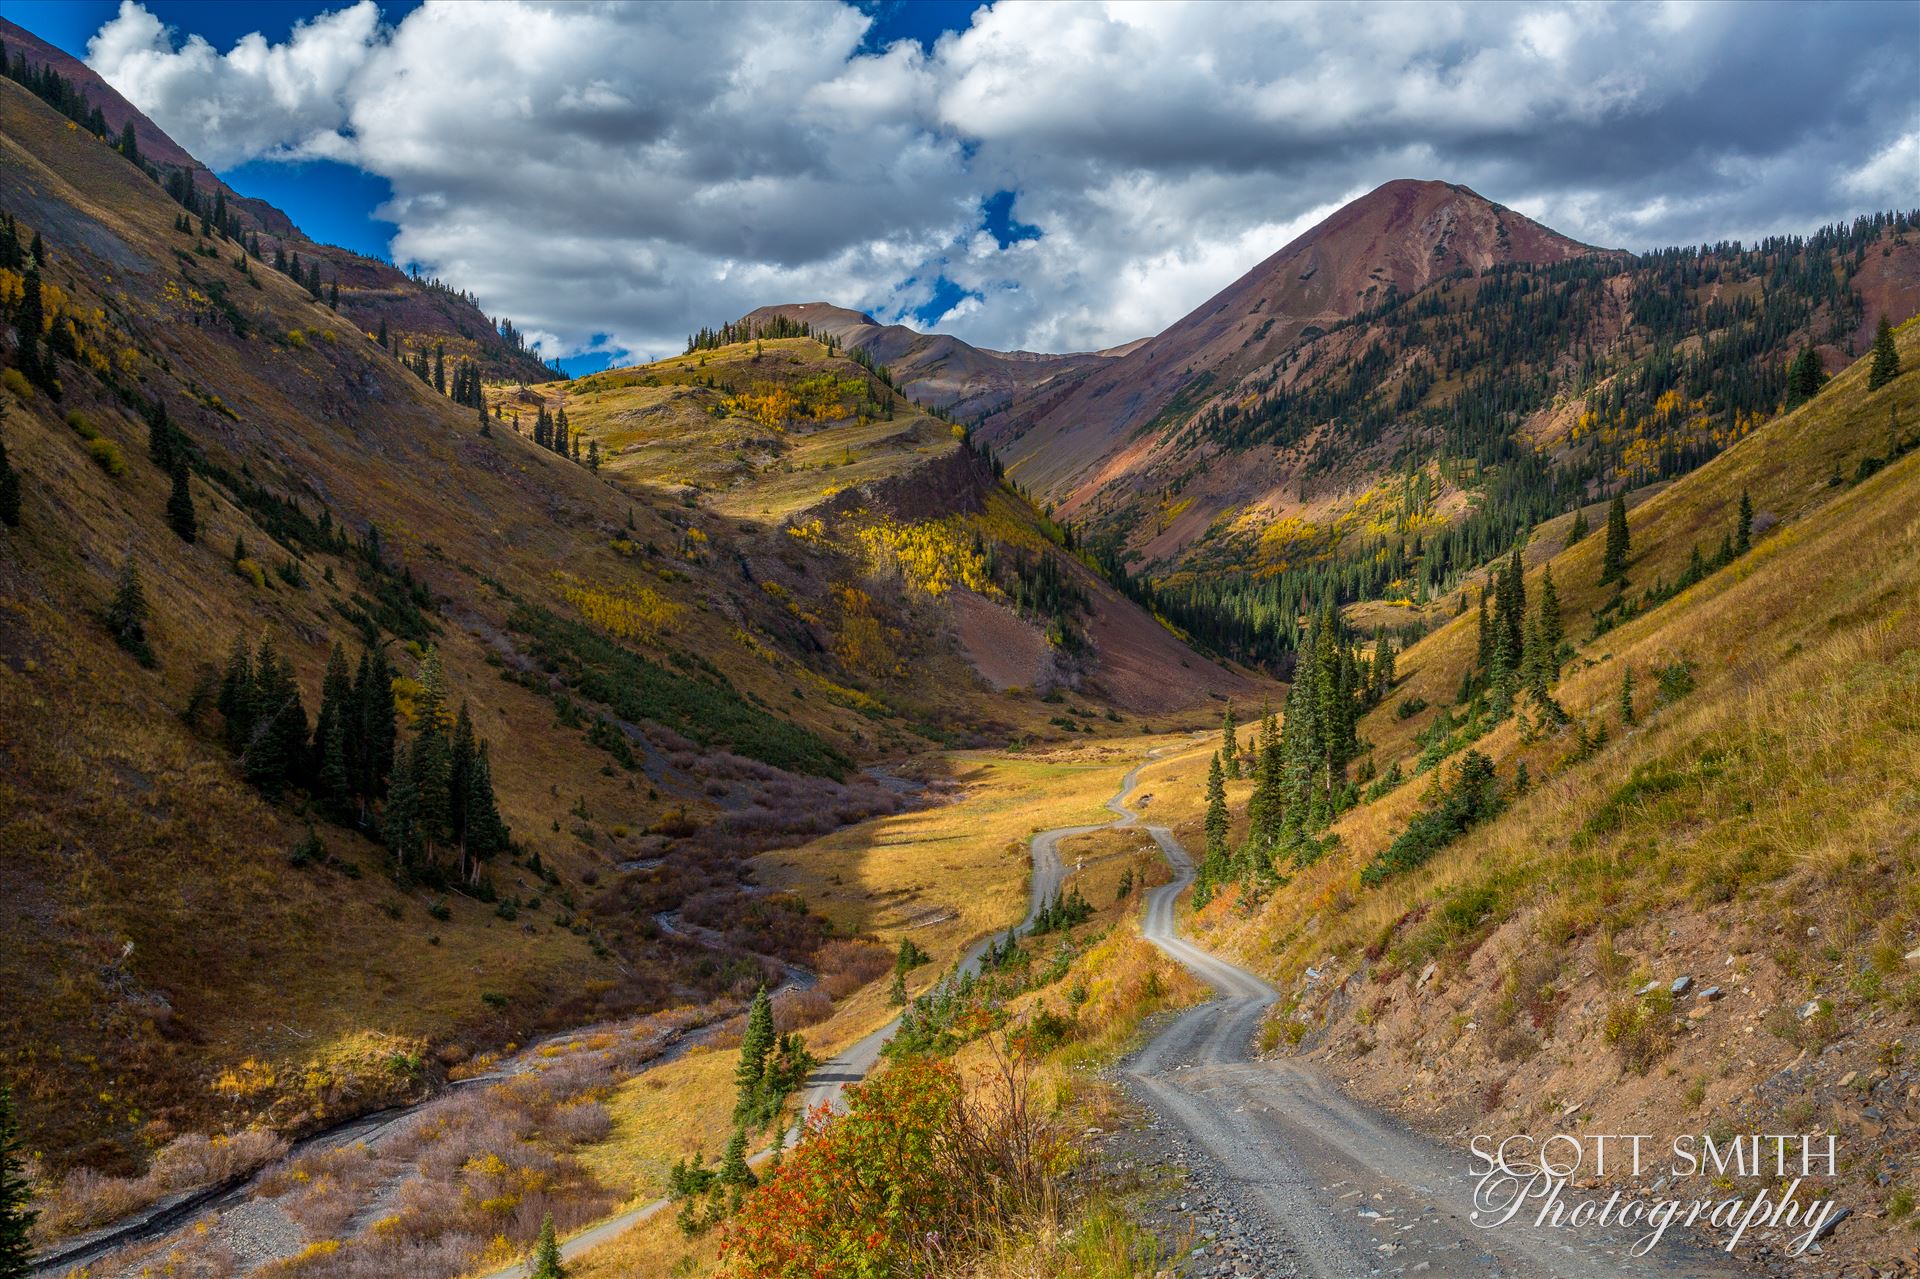 Mount Baldy from Washington Gulch - Mount Baldy, the reddish colored mountain the background, from Washington Gulch. Just outside of Crested Butte, Colorado on Schofield Pass. by Scott Smith Photos